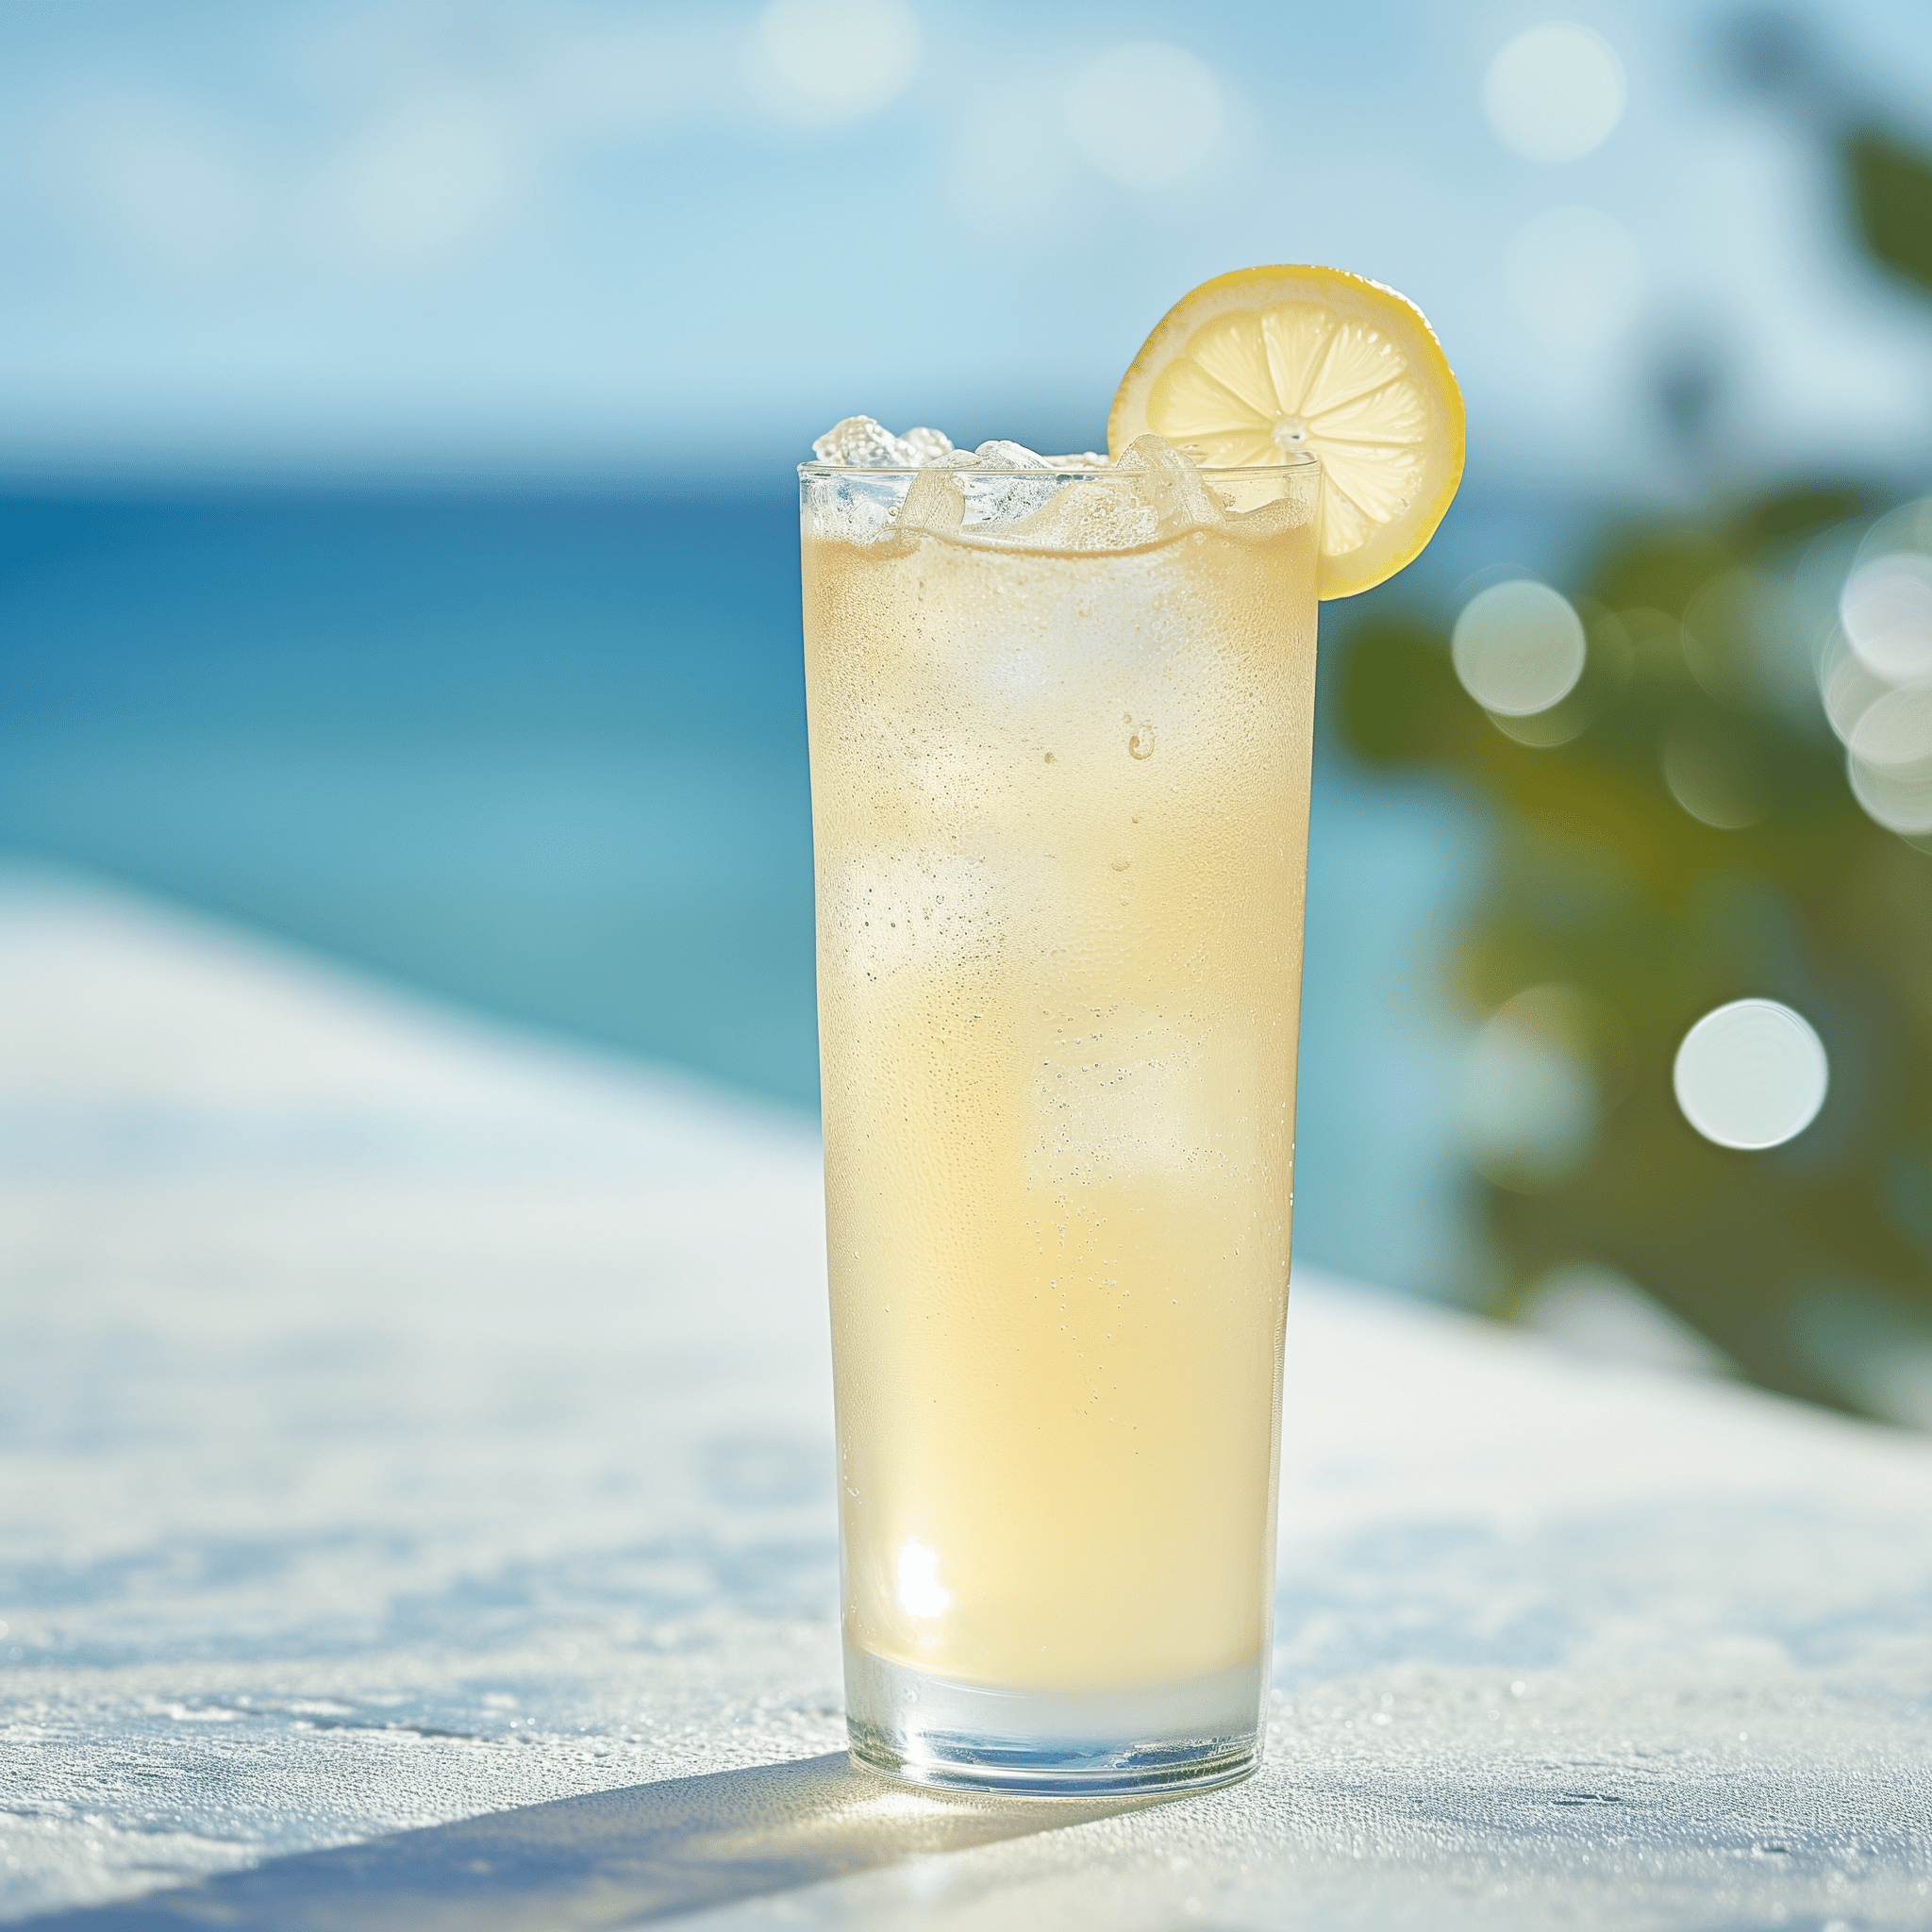 St Tropez Cocktail Recipe - The St Tropez cocktail is a harmonious blend of sweet and sour, with the elderflower liqueur providing a delicate floral sweetness that is balanced by the tartness of the lemon juice. The vodka adds a clean, crisp spirit base, while the soda water or tonic introduces a fizzy lightness that makes the drink refreshing and easy to sip.